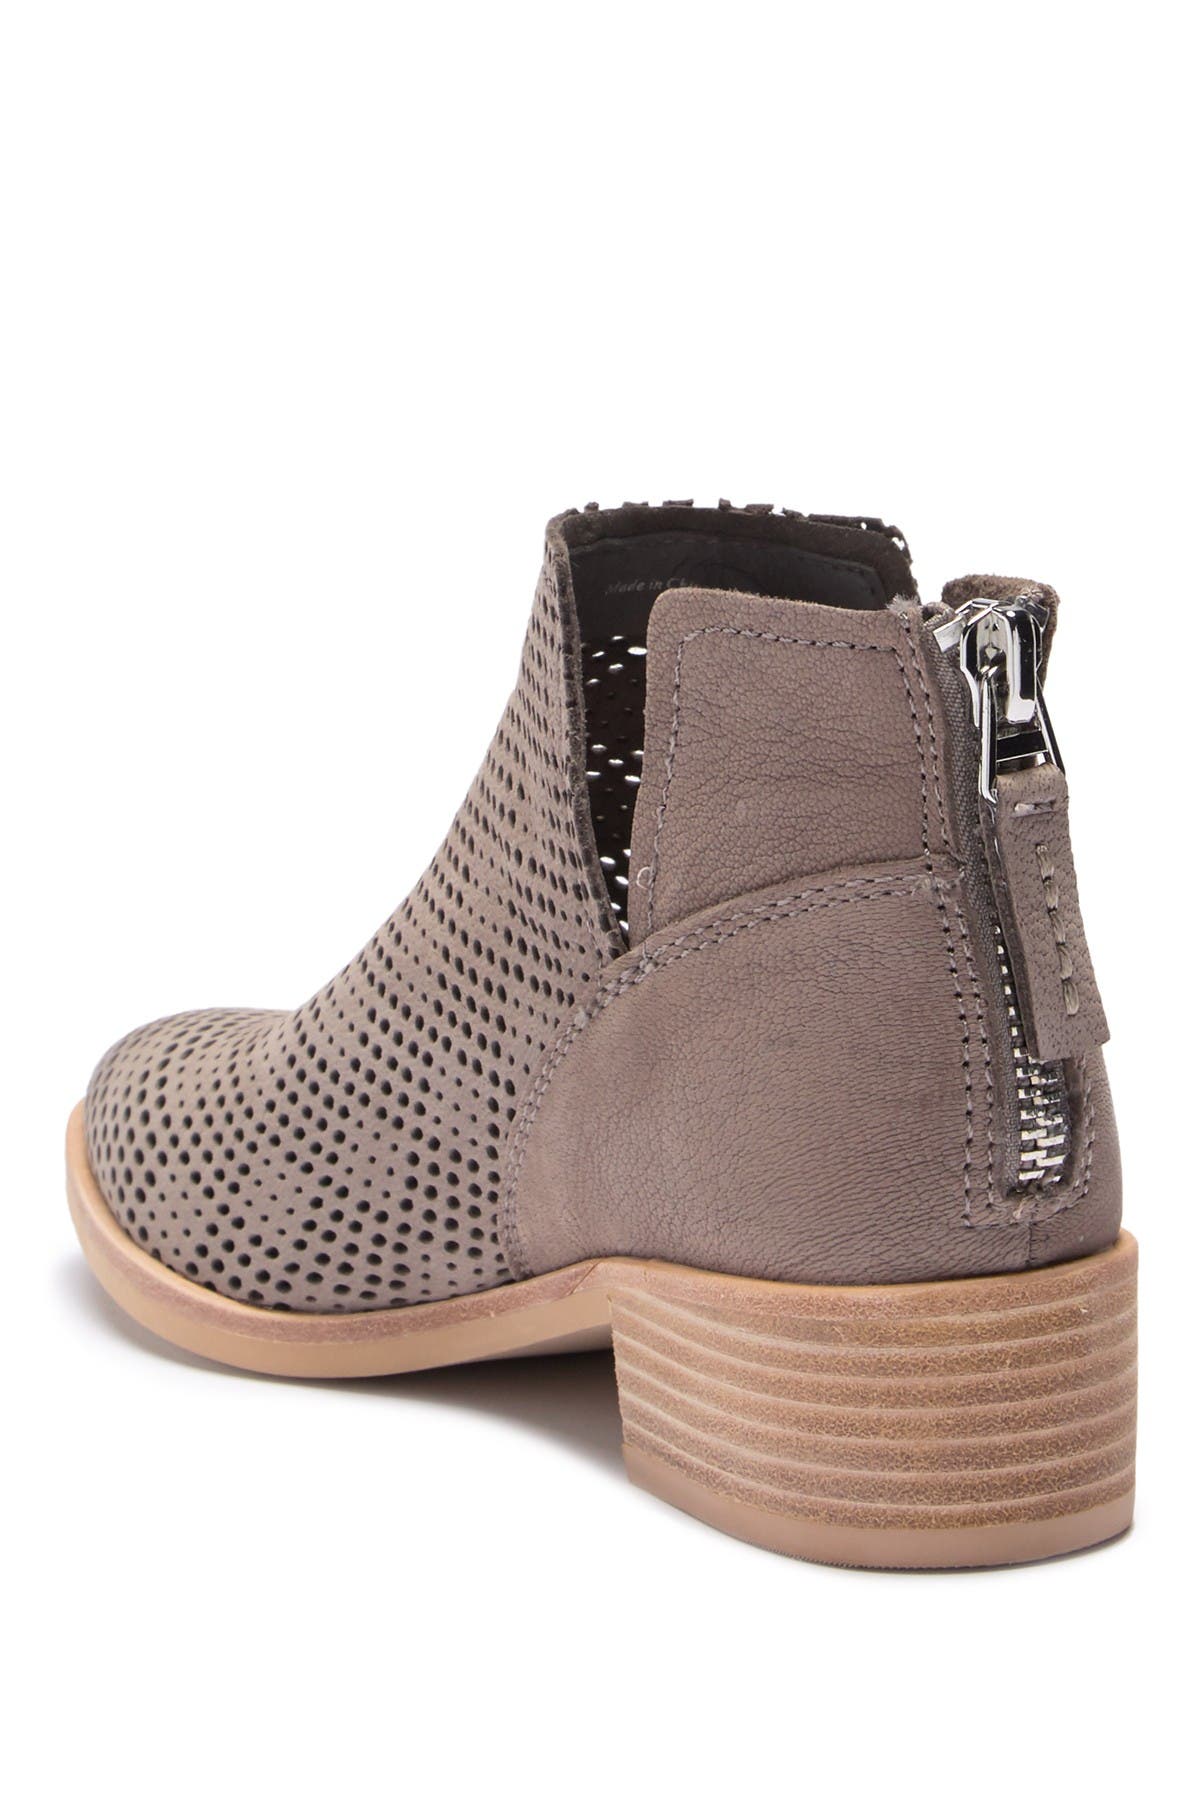 Dolce Vita | Tommi Perforated Bootie 